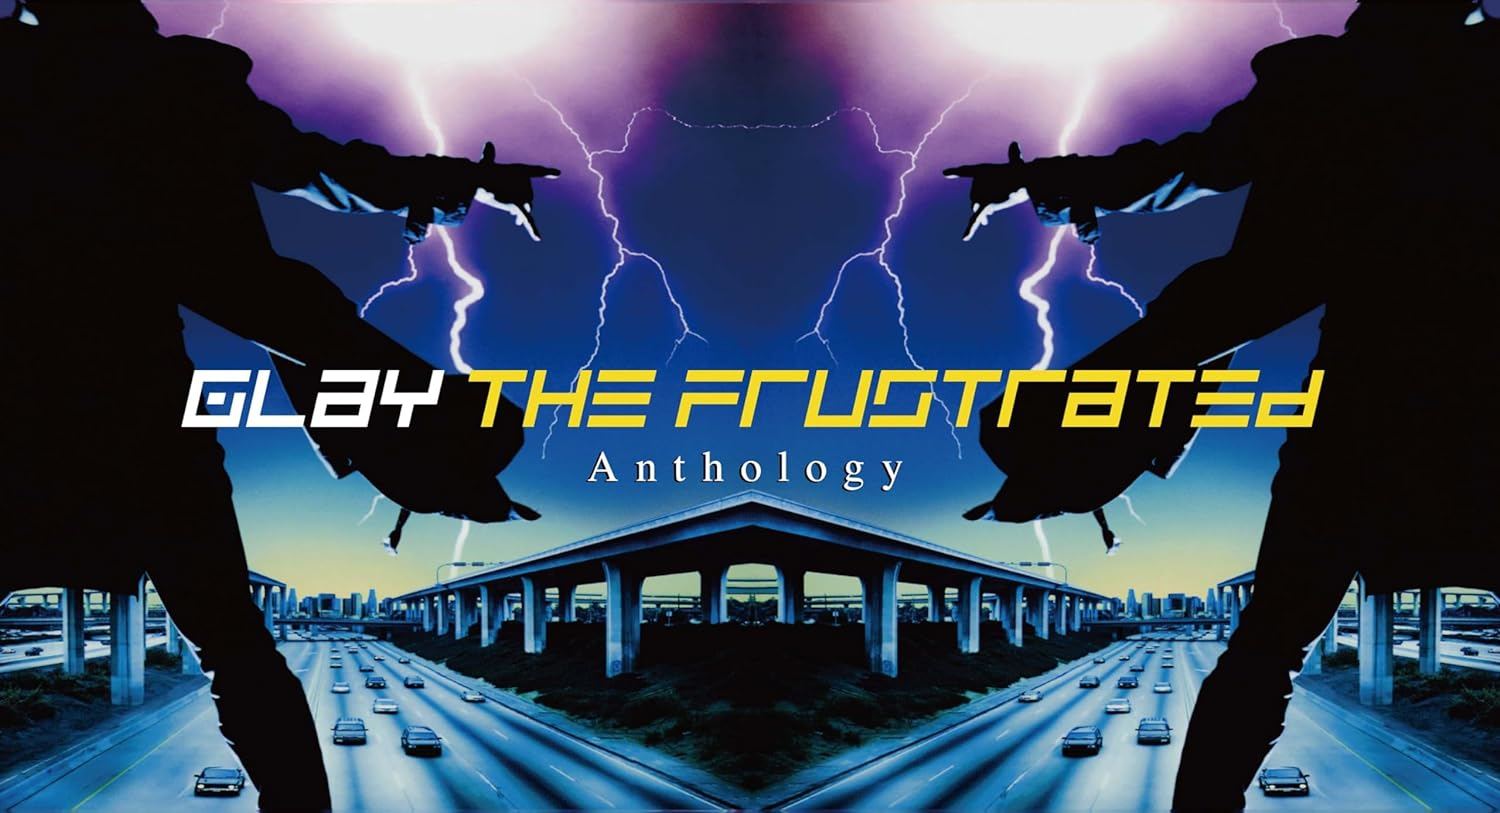 The Frustrated Anthology [2CD+Blu-ray] (Glay) - Bitcoin & Lightning accepted